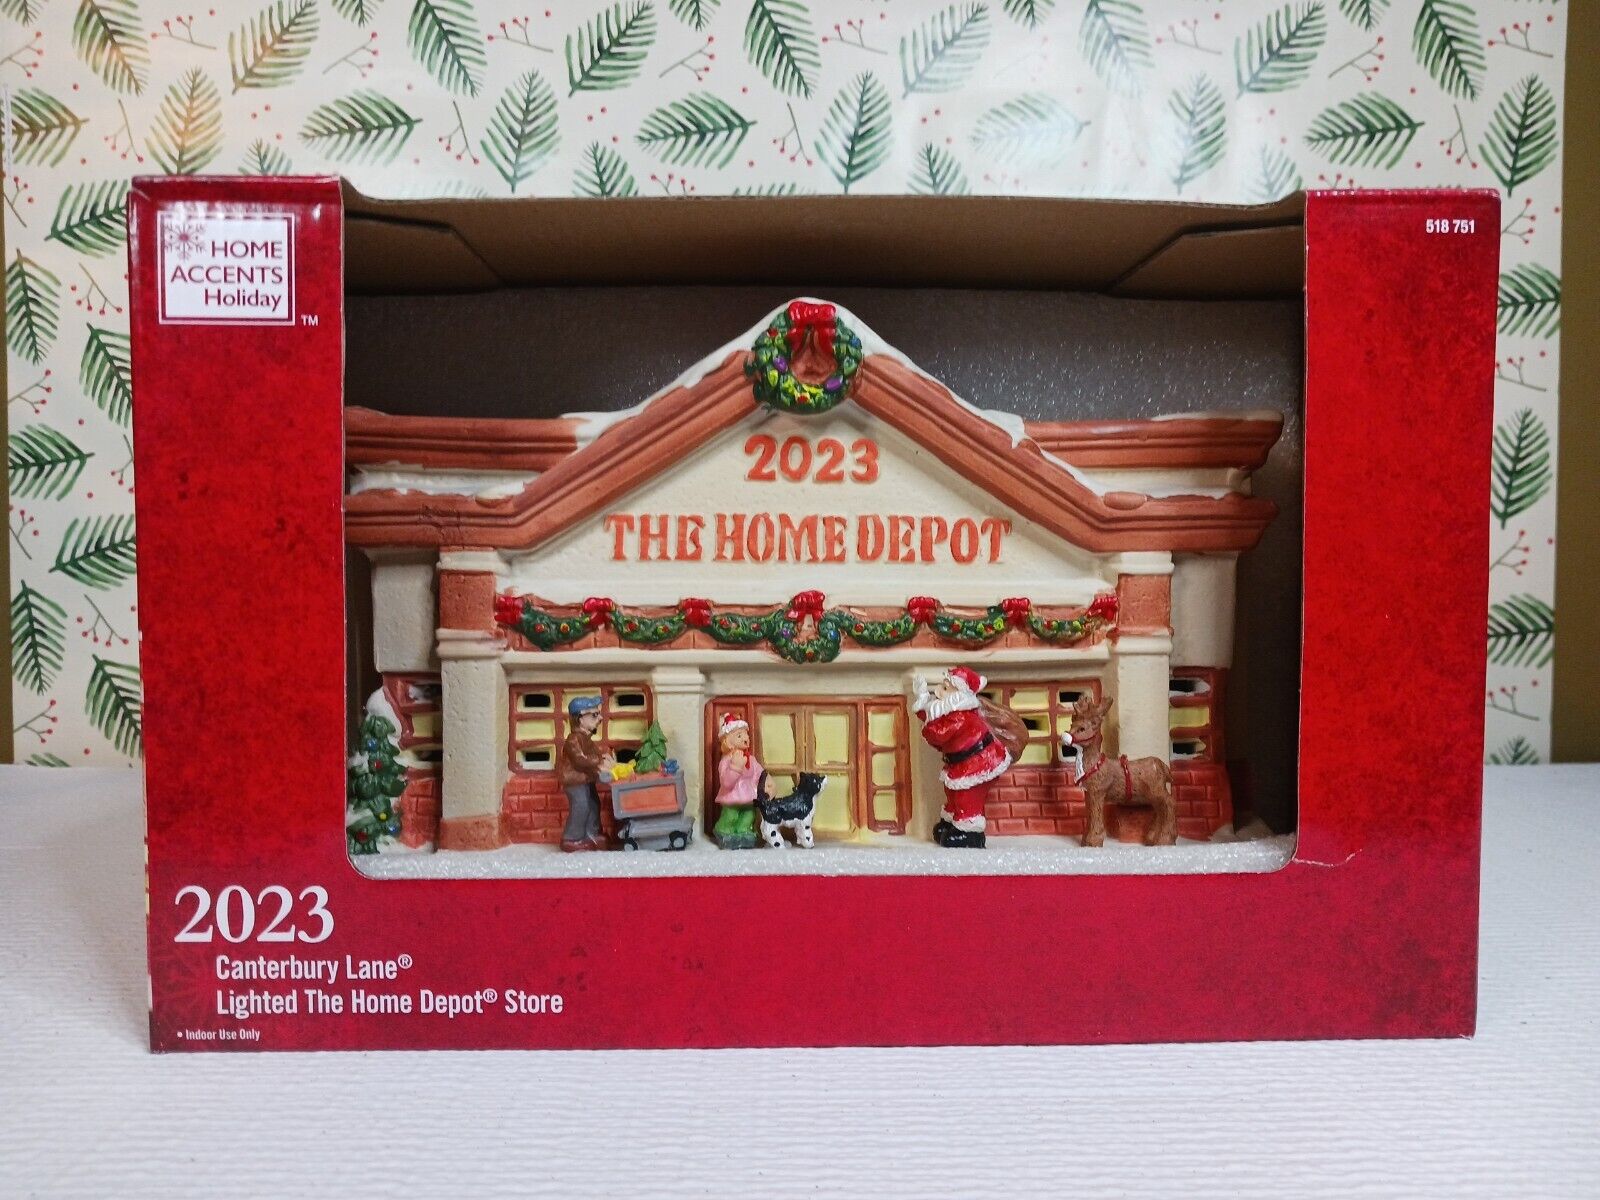 ⭐️ New Canterbury Lane Home Accents Holiday Lights Up Home Depot Store 2023 Box